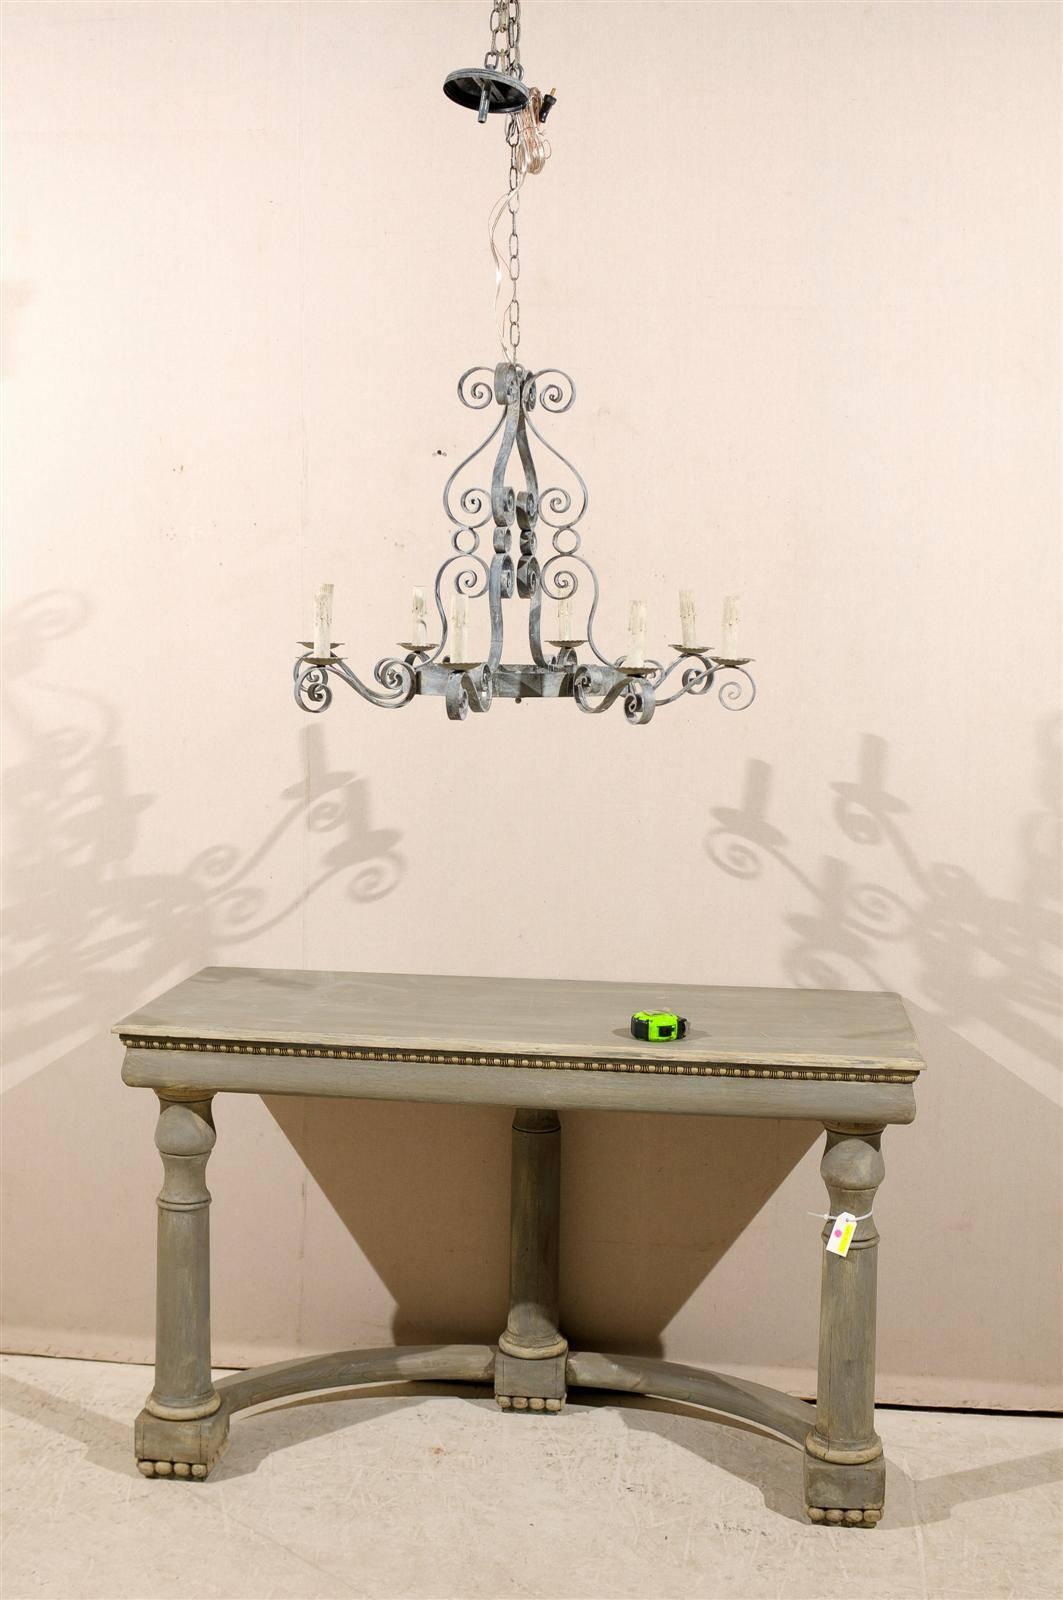 A French vintage eight-light painted iron chandelier with S-scroll arms. This ornate French chandelier has S-scrolls throughout. It also has circle designs flourishing the middle area. This chandelier has a nice silver colored finish. It is from the